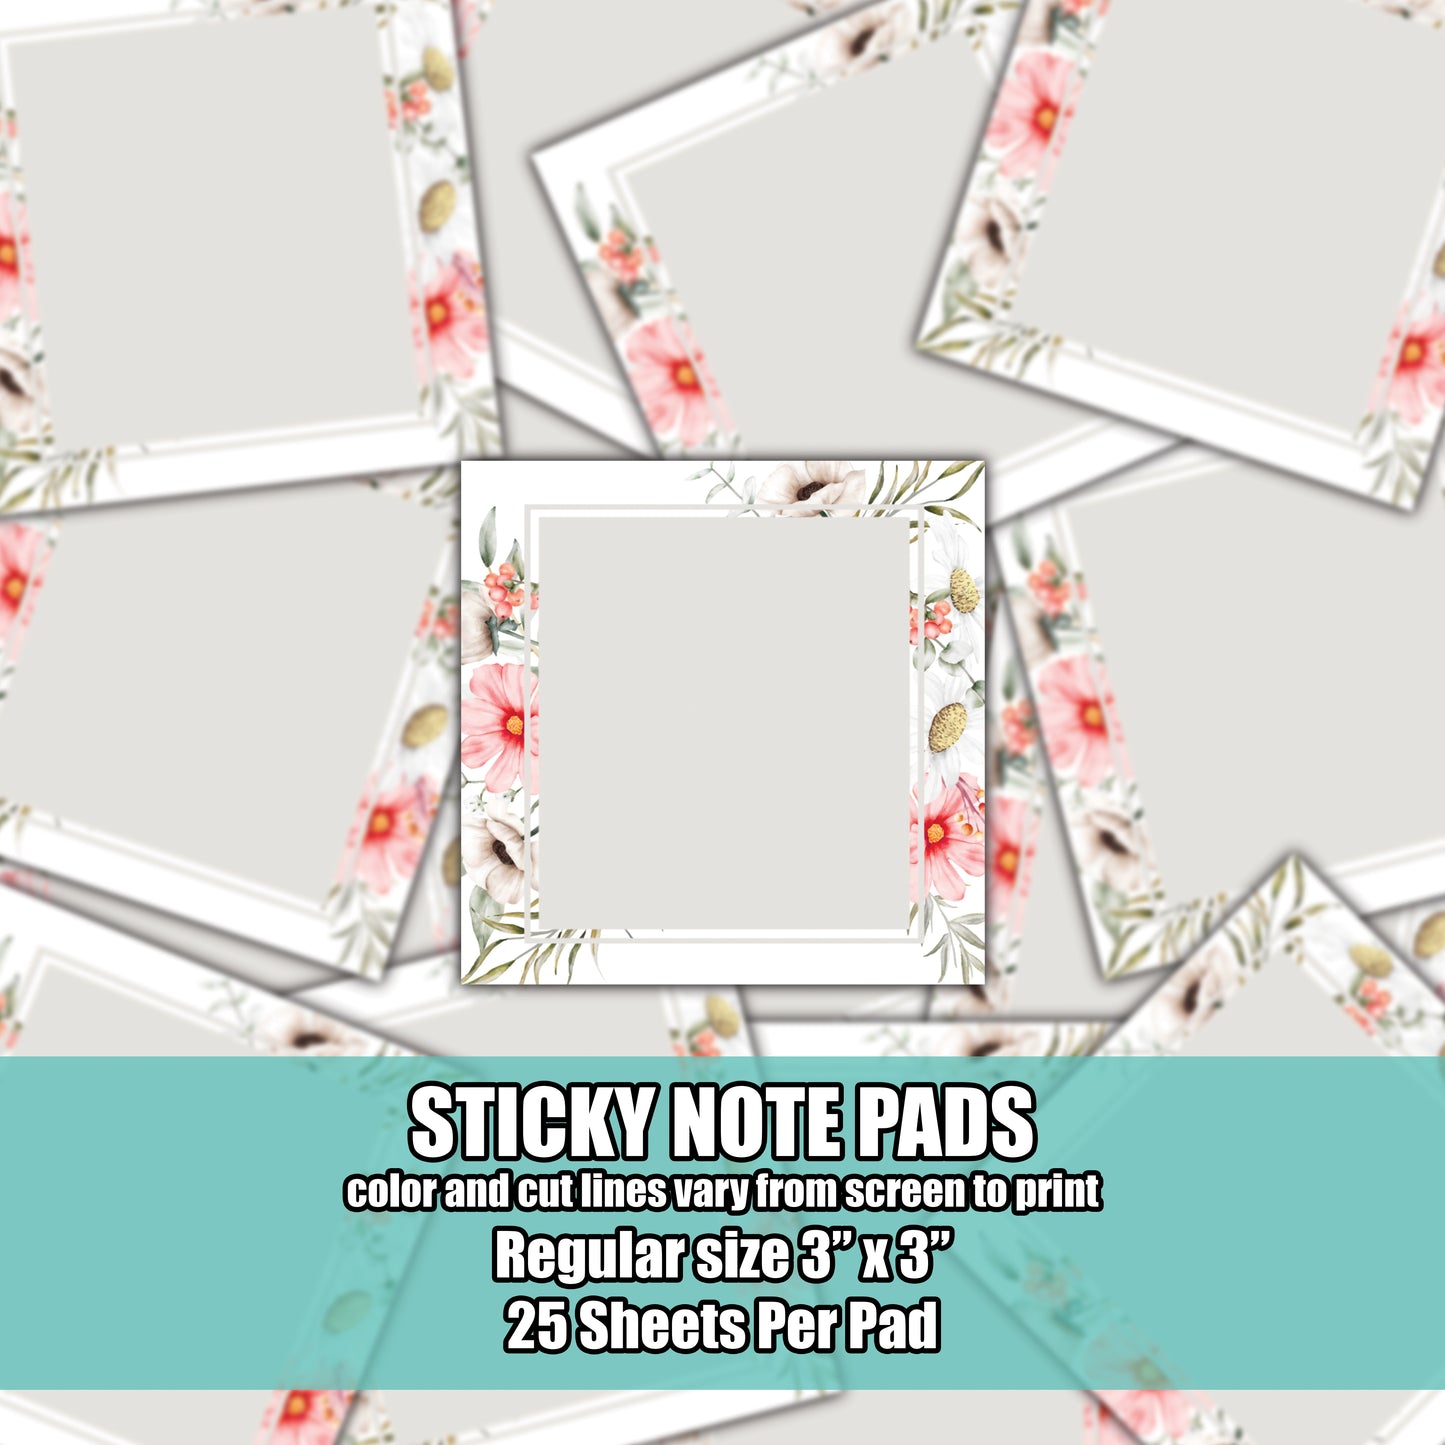 STICKY NOTE PAD - PINK FLORAL